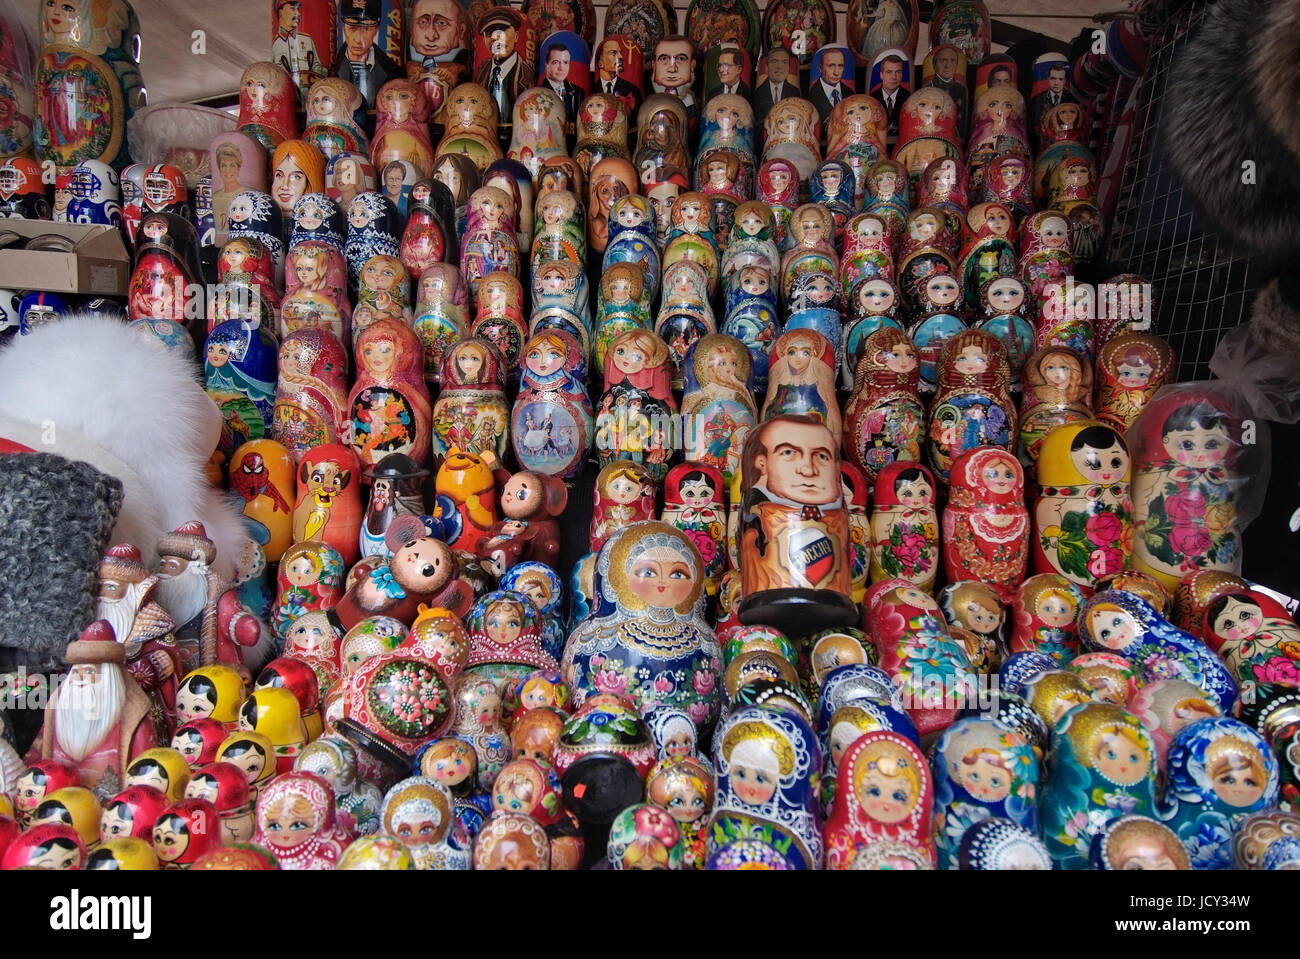 Arbat street, pedestrian street with souveniers like Russian Matryoshkas or military insignia of the Russian army, street artist, musicians, singers,  Stock Photo